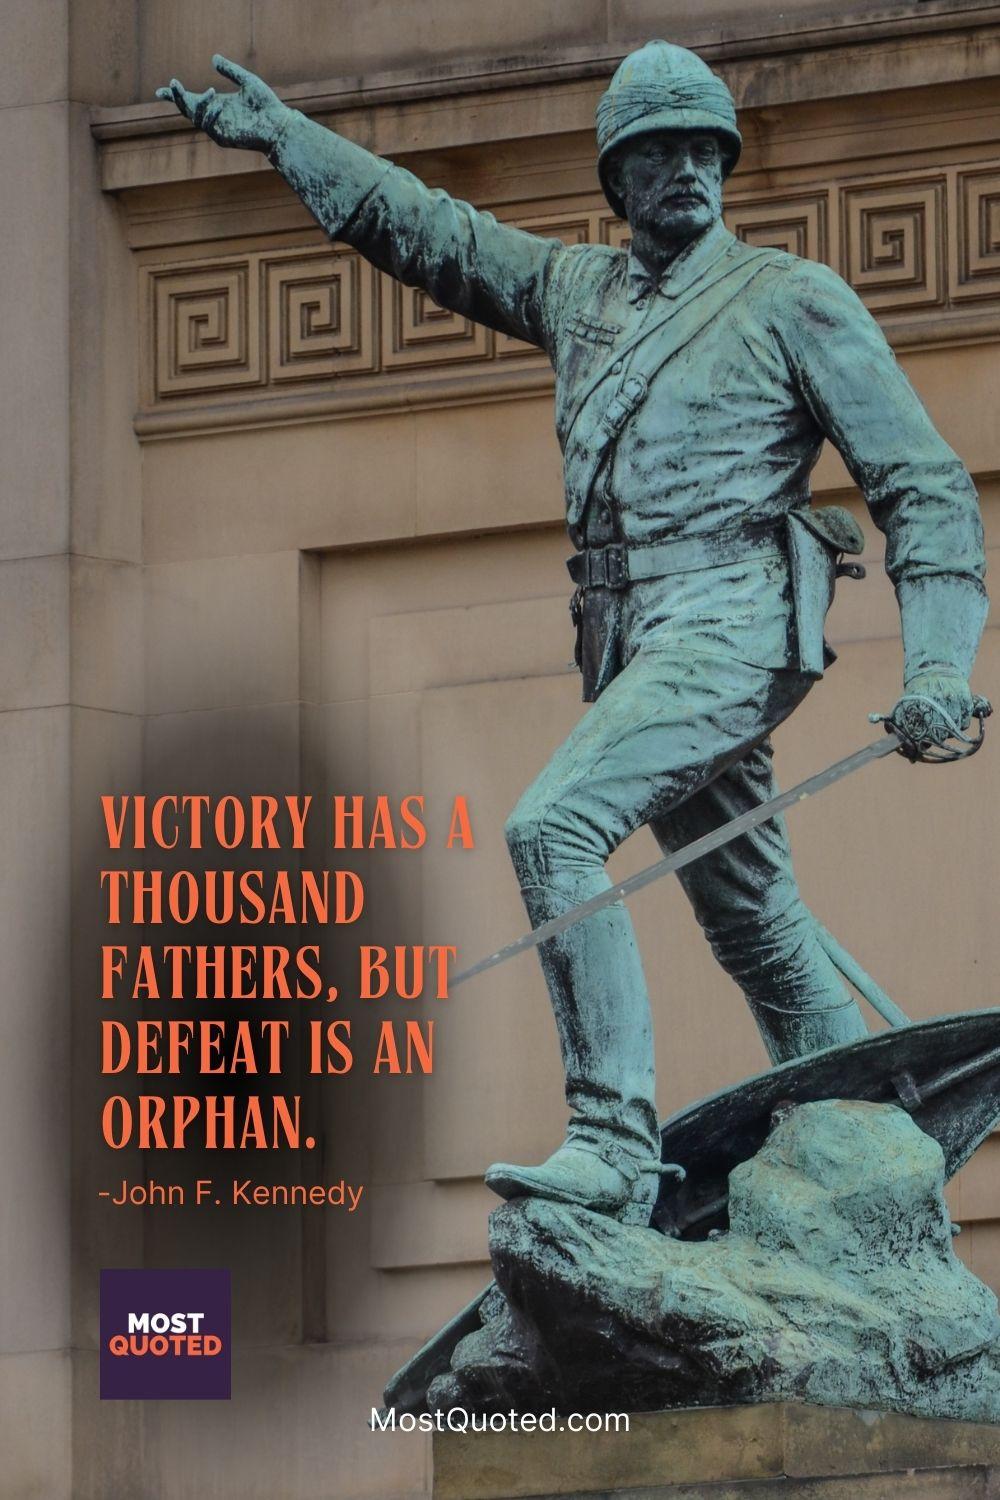 Victory has a thousand fathers, but defeat is an orphan. - John F. Kennedy